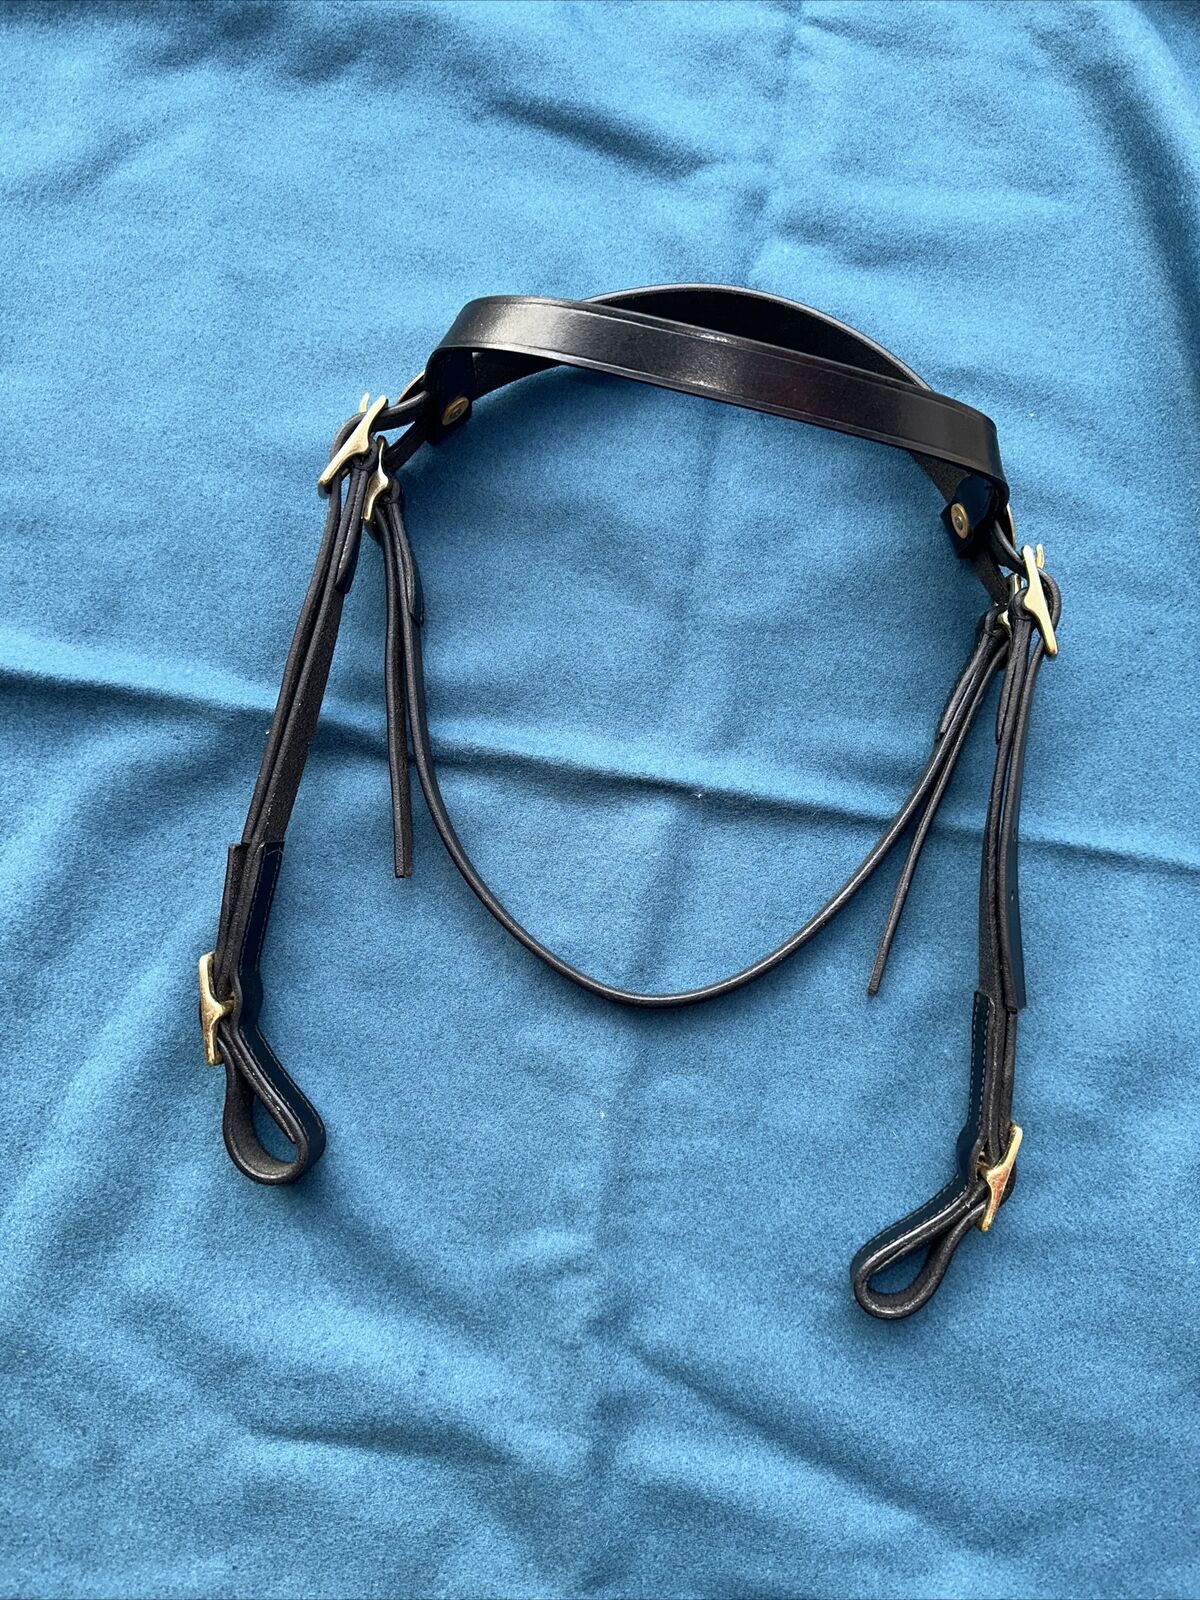 Model 1874 Leather Bridle for Cavalry Indian Wars McClellan Saddle